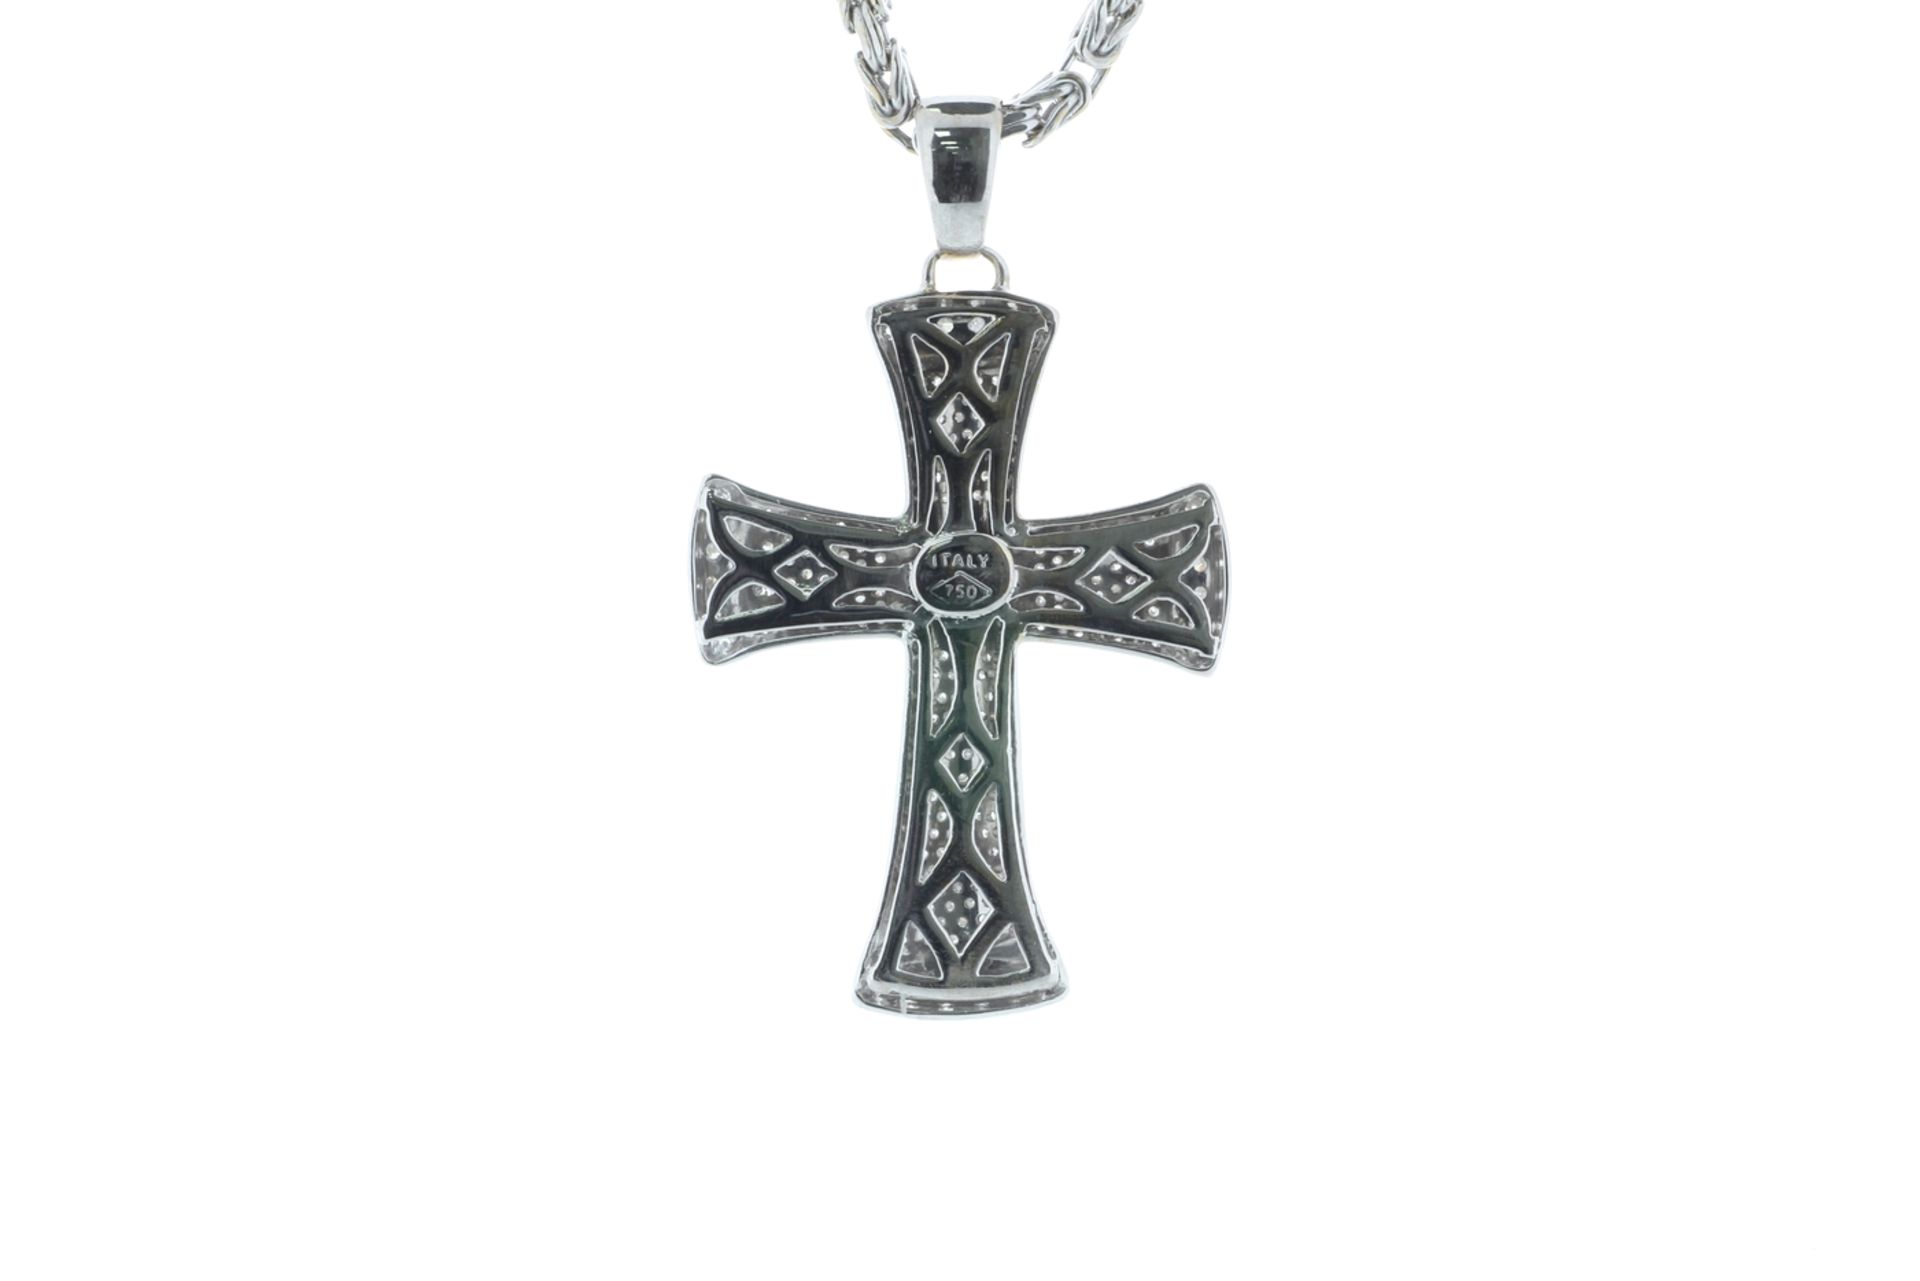 18ct White Gold Diamond Cross Pendant and Chain 5.12 Carats - Valued By AGI £78,880.00 - A beautiful - Image 4 of 5